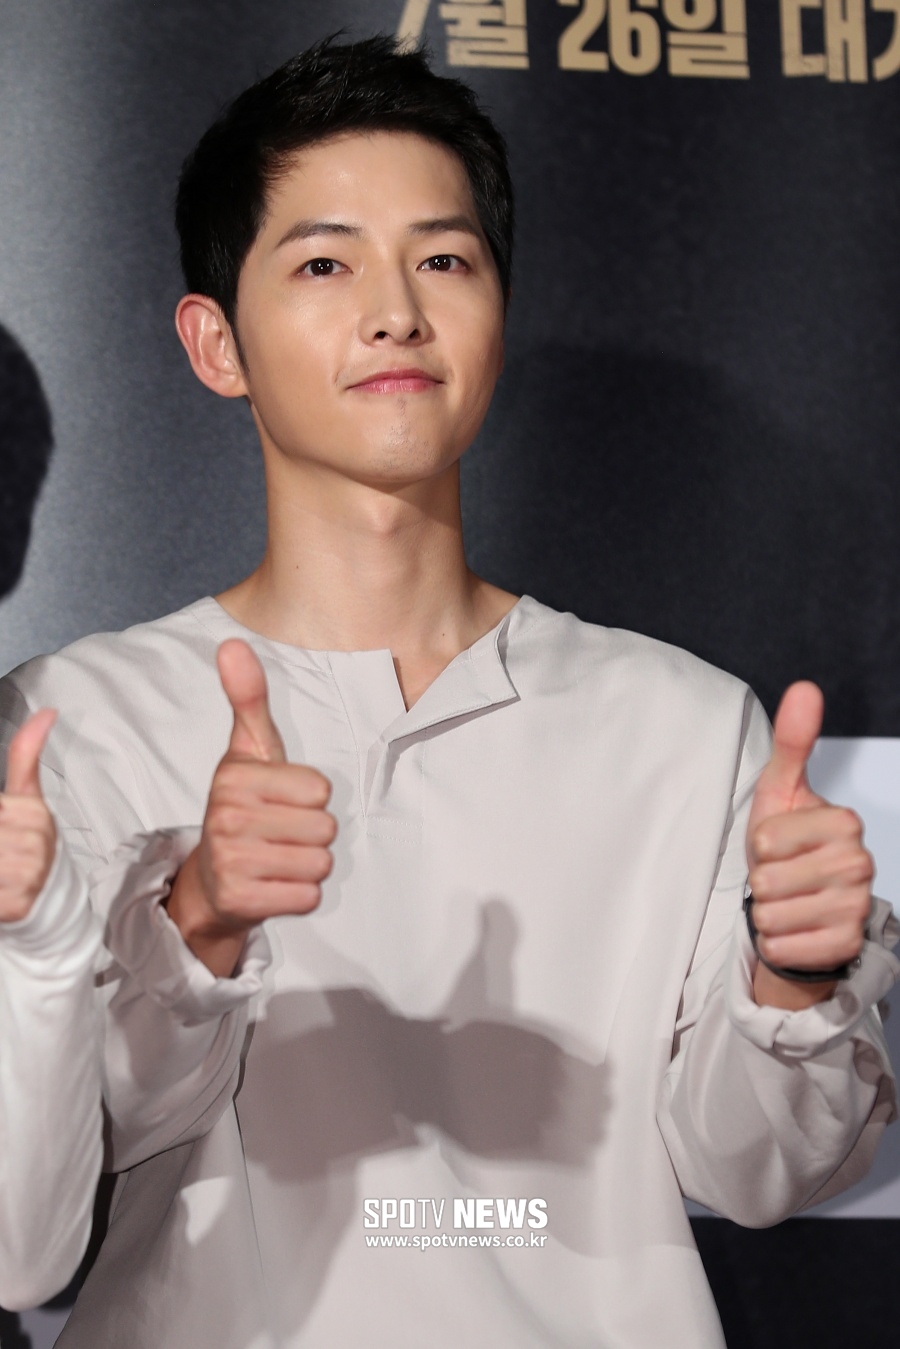 Actor Song Joong-ki, 34, and Song Hye-kyo, 38, were crushed after a year and eight months of marriage.In this regard, the two lawyers and their agencies announced their position.Park Jae-hyun, a lawyer for Song Joong-ki, said on June 27, I received an application for divorce settlement on June 26 at the Seoul Family Court on behalf of Song Joong-ki.Song Joong-ki apologized through his legal representative, saying, I apologize for giving bad news to many people who love and care for me. I have been proceeding with the mediation process for divorce with Song Hye-kyo.Song Joong-kis agency, Blussom Entertainment, said on the day, Song Joong-ki - Song Hye-kyo decided to finish his marriage after careful consideration, and is in the process of divorce after amicable agreement.Song Joong-ki said, I am sincerely sorry to have conveyed this news to many people who congratulated and supported the marriage of the two people. As it is Actors personal affairs, I would like to ask you to refrain from unconventional speculation and dissemination of false facts related to divorce.Song Hye-kyo also admitted that the two mens breakup was true, saying, Song Hye-kyo is going through divorce proceedings after careful consideration with her husband (Song Joong-ki).The reason for the divorce of the two people, which Song Hye-kyo said, is a personality difference. Song Hye-kyo said, Both sides can not overcome the difference, so I have to make this decision.I would like to politely understand that the other specific contents can not be confirmed to the privacy of both Actors. I also ask you to refrain from stimulating reports and speculative comments for each other. I am sorry for the inconvenience.I will try to greet you in a better way in the future. Song Hye-kyos law firm also announced its official position on the day.Park Young-sik, a lawyer for the law office, Song Hye-kyo, said, Song Hye-kyo and Song Joong-ki agreed to divorce and received an application for divorce settlement in the Seoul Family Court for the divorce proceedings.The two sides have already agreed to divorce, and only the adjustment process is ahead, he said.Song Joong-ki and Song Hye-kyo, who developed into lovers in the 2016 drama Dawn of the Sun, married on October 31, 2017, but broke down in a year and eight months.The following is the official position of Song Joong-ki law firm.Good morning, Mr. Actor Song Joong-ki, attorney for the law firm Yu Plaza, Park Jae-hyun.Our law firm filed an application for divorce mediation with the Seoul Family Court on June 26 on behalf of Song Joong-ki.In addition, we will convey the official position of Song Joong-ki as follows.Thank you.Hello, Song Joong-ki.I am sorry to tell you that I am sorry to give bad news to many people who love and care for me.I have been in the process of coordinating for divorce with Song Hye-kyo.Thank you.The following is the official position of Song Joong-ki agency Blussom Entertainment.How are you? Bluthumb Entertainment.Id like to express my official position regarding the divorce of Song Joong-ki Actor.Song Joong-ki Song Hye-kyo Actor has decided to finish his marriage after careful consideration, and is in the process of divorce after amicable agreement.I am deeply sorry to have conveyed this news to many people who congratulated and supported the marriage of the two.However, as it is Actors personal business, I would like to ask you to refrain from any unreasonable speculation and dissemination of false facts related to divorce.Im sorry again for not giving you the good news. Thank you.The following is the official position of Song Hye-kyo agency UAA Korea.Good morning. Song Hye-kyo is UAA Korea.Im sorry to say hello to you first with bad news.Currently, our actor Song Hye-kyo is in the process of divorce after careful consideration with her husband.The reason is due to the difference in personality, and both sides have not overcome the difference, so they have to make this decision.I respectfully ask for your understanding that the other details cannot be confirmed by the private life of both Actors.Also, please refrain from stimulating reports and speculative comments for each other.Im sorry for the inconvenience. Ill try to make you look better in the future. Thank you.The following is the official position of the Song Hye-kyo Legal Corporation.Good morning. Park Young-sik, attorney for the legal office nomination, Actor Song Hye-kyos legal representative.Song Hye-kyo and Song Joong-ki agreed to divorce, and accordingly they filed an application for divorce settlement with the Seoul Family Court for divorce proceedings.The two sides have already agreed to divorce, and the settlement process is only ahead. Thank you.=